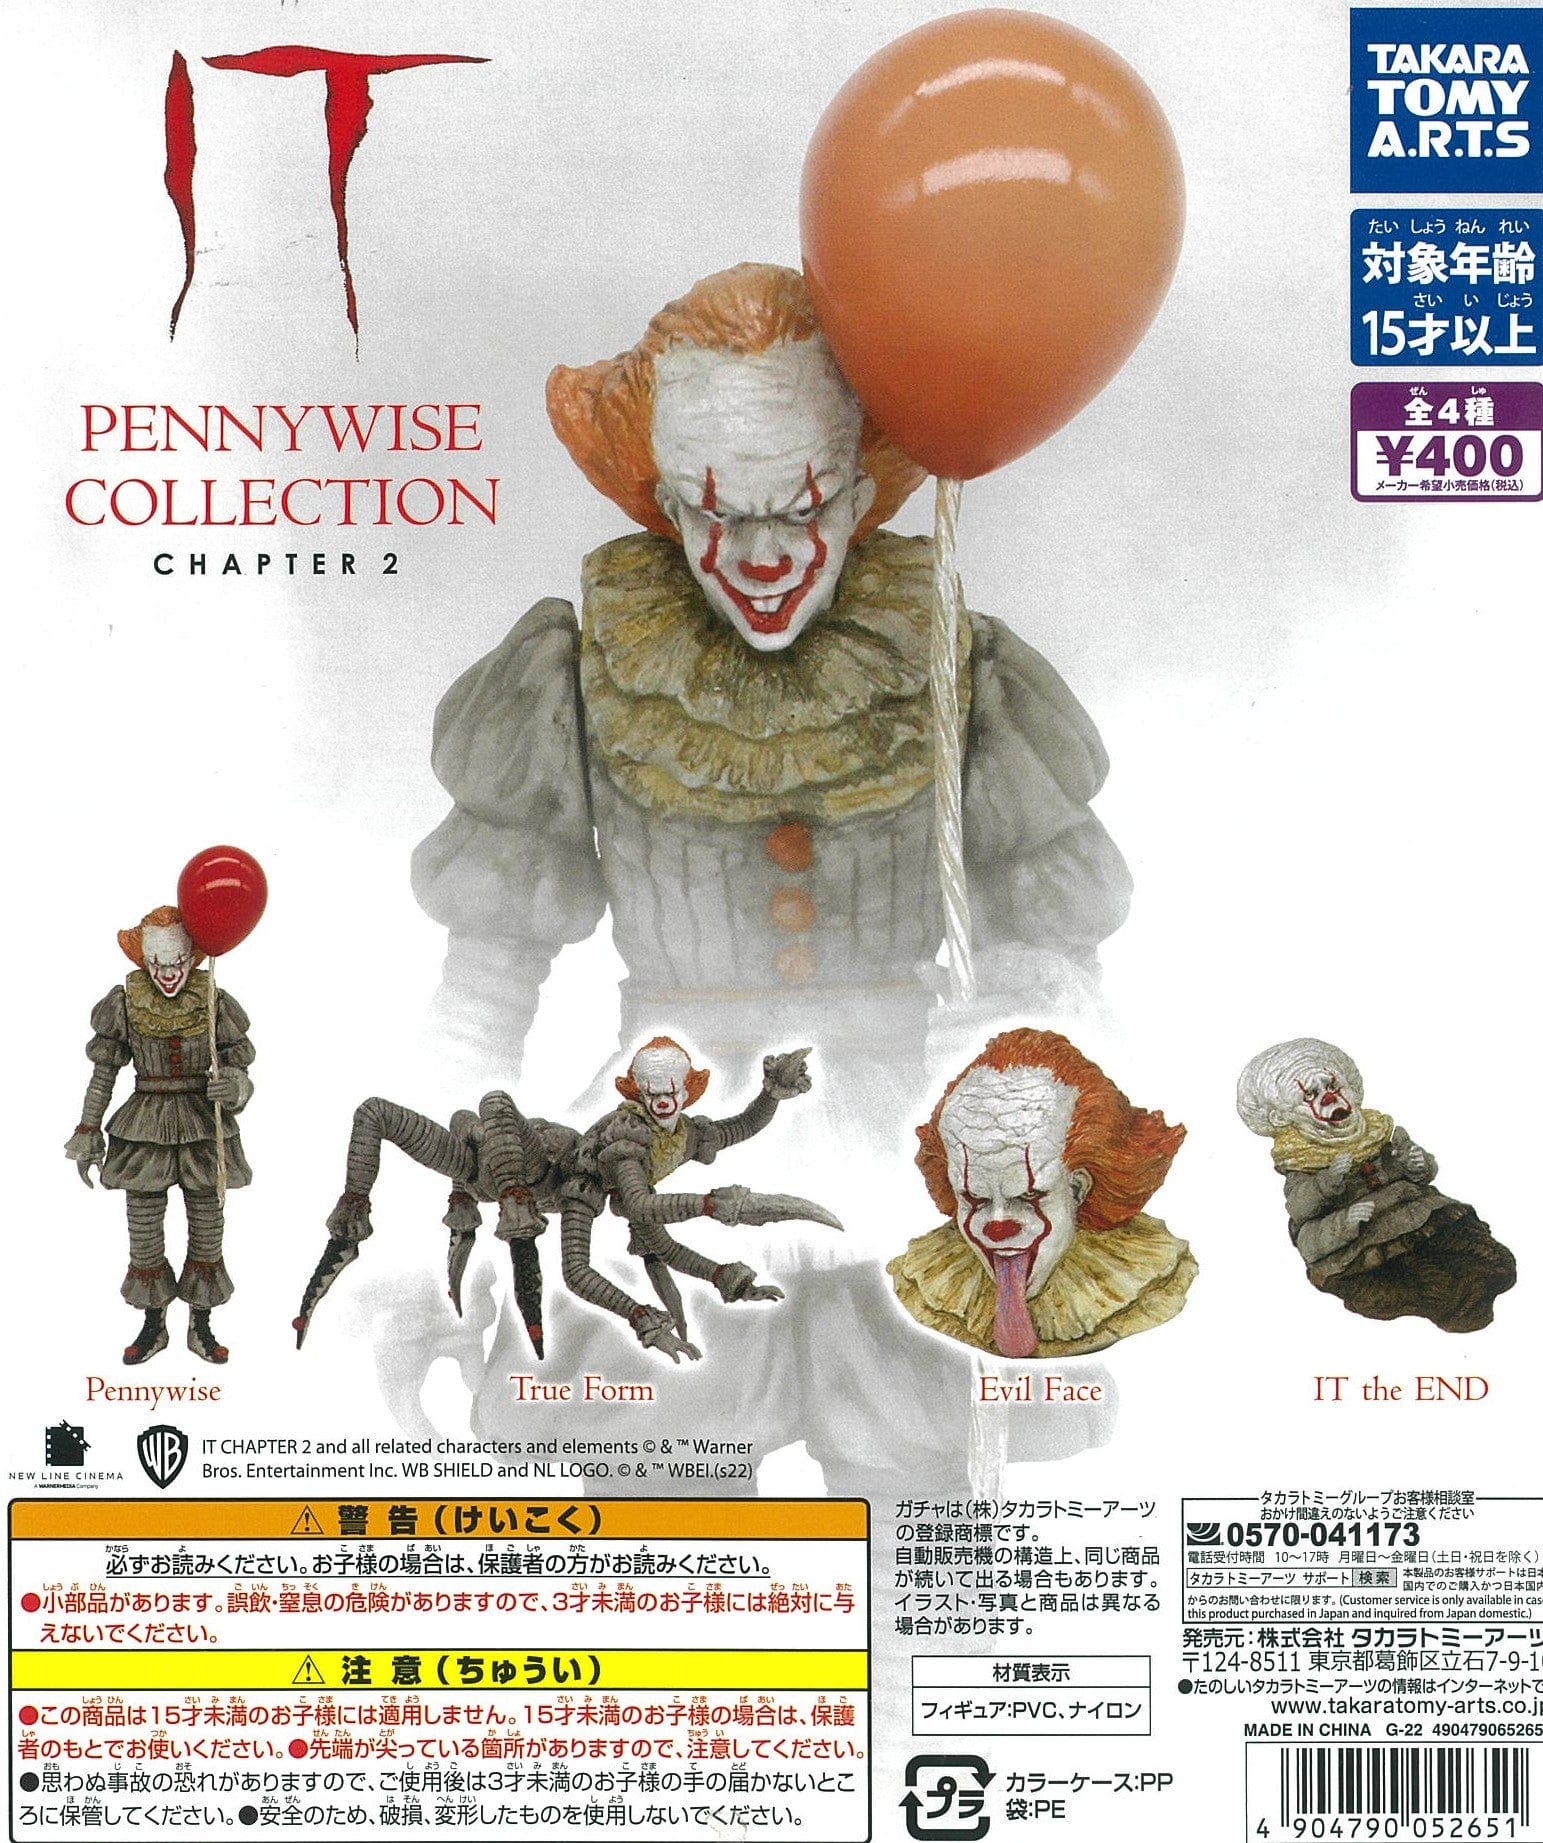 Takara Tomy A.R.T.S CP1814 It Pennywise Collection Chapter 2